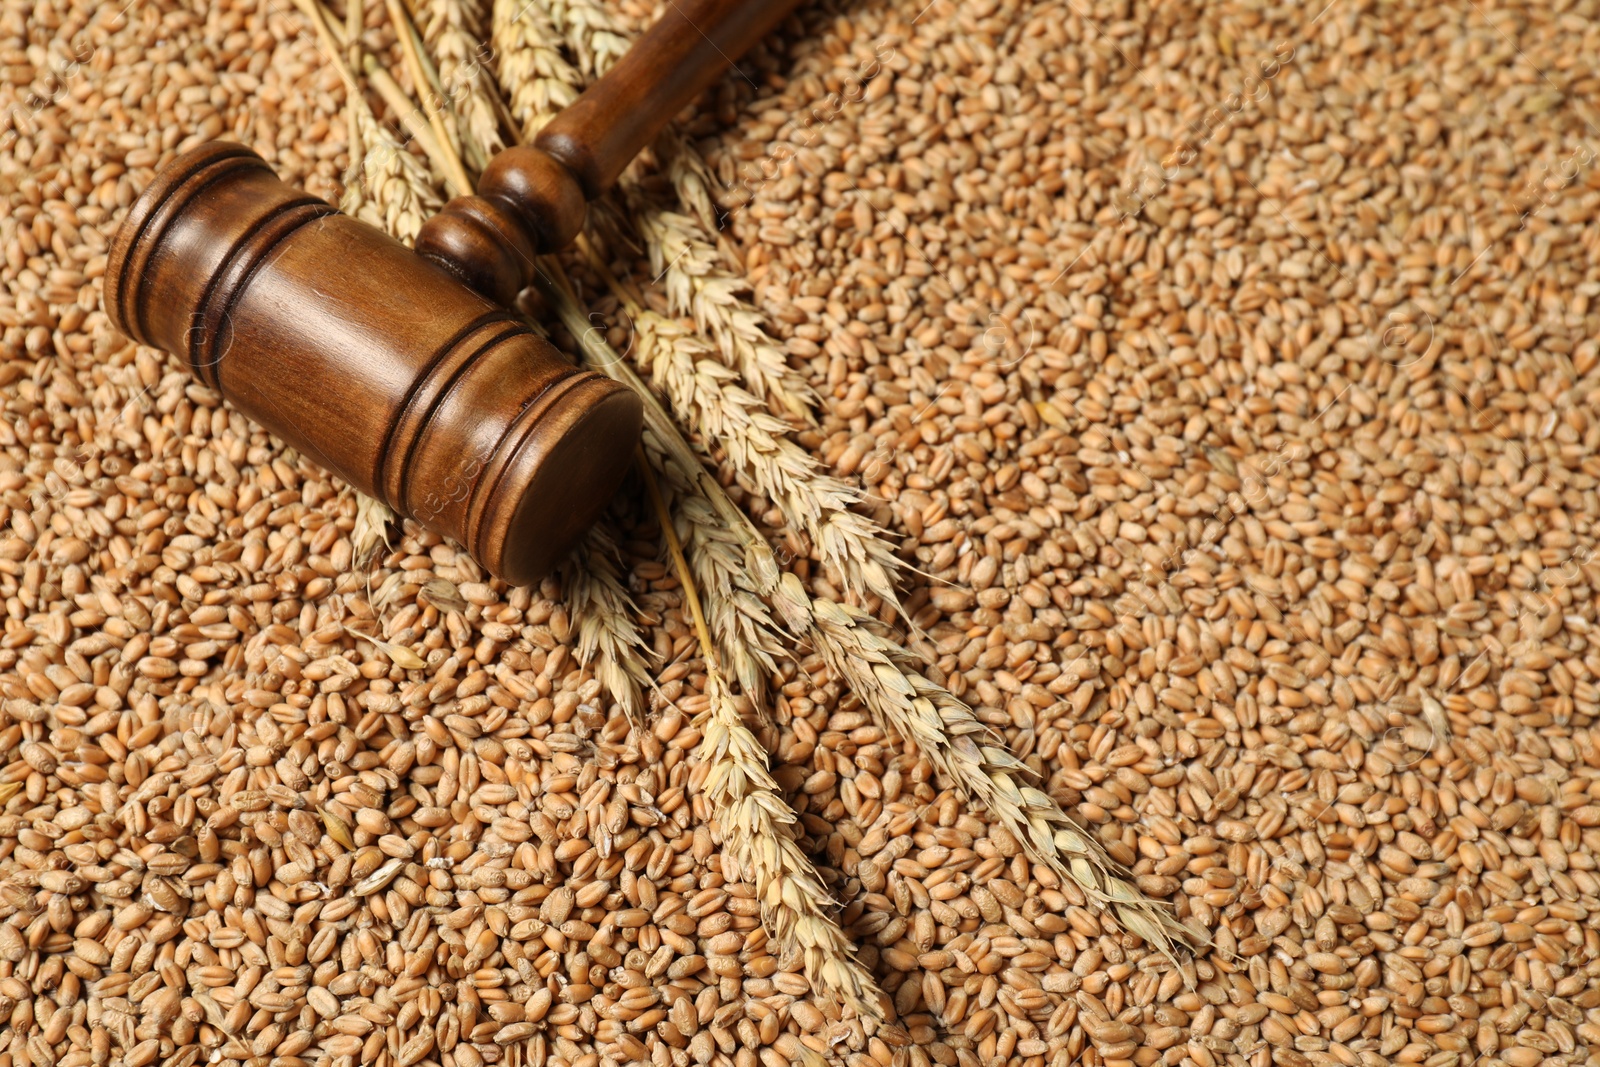 Photo of Wooden gavel and wheat ears on grains, closeup. Agricultural deal